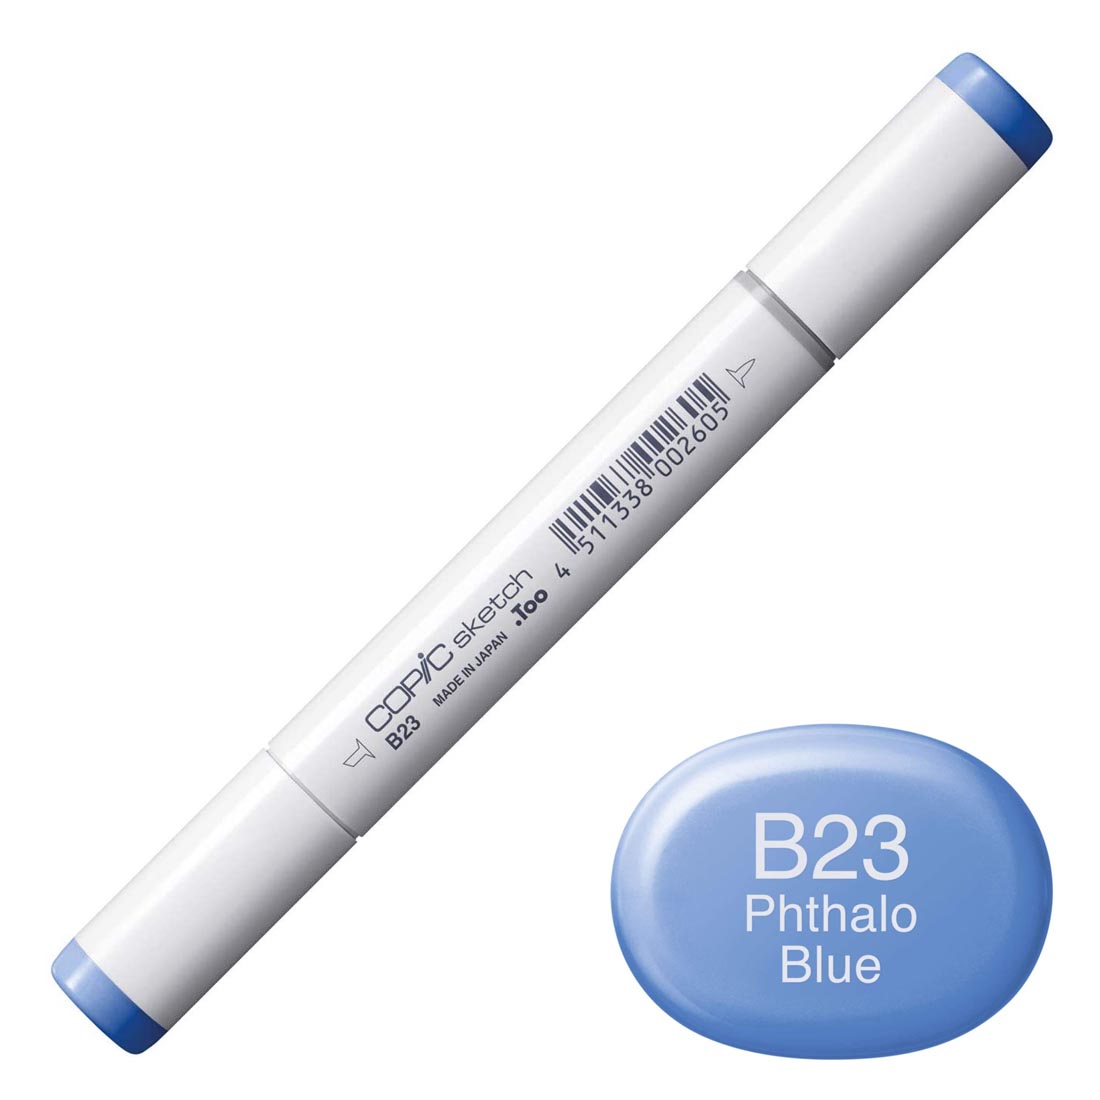 COPIC Sketch Marker with a color swatch and text of B23 Phthalo Blue